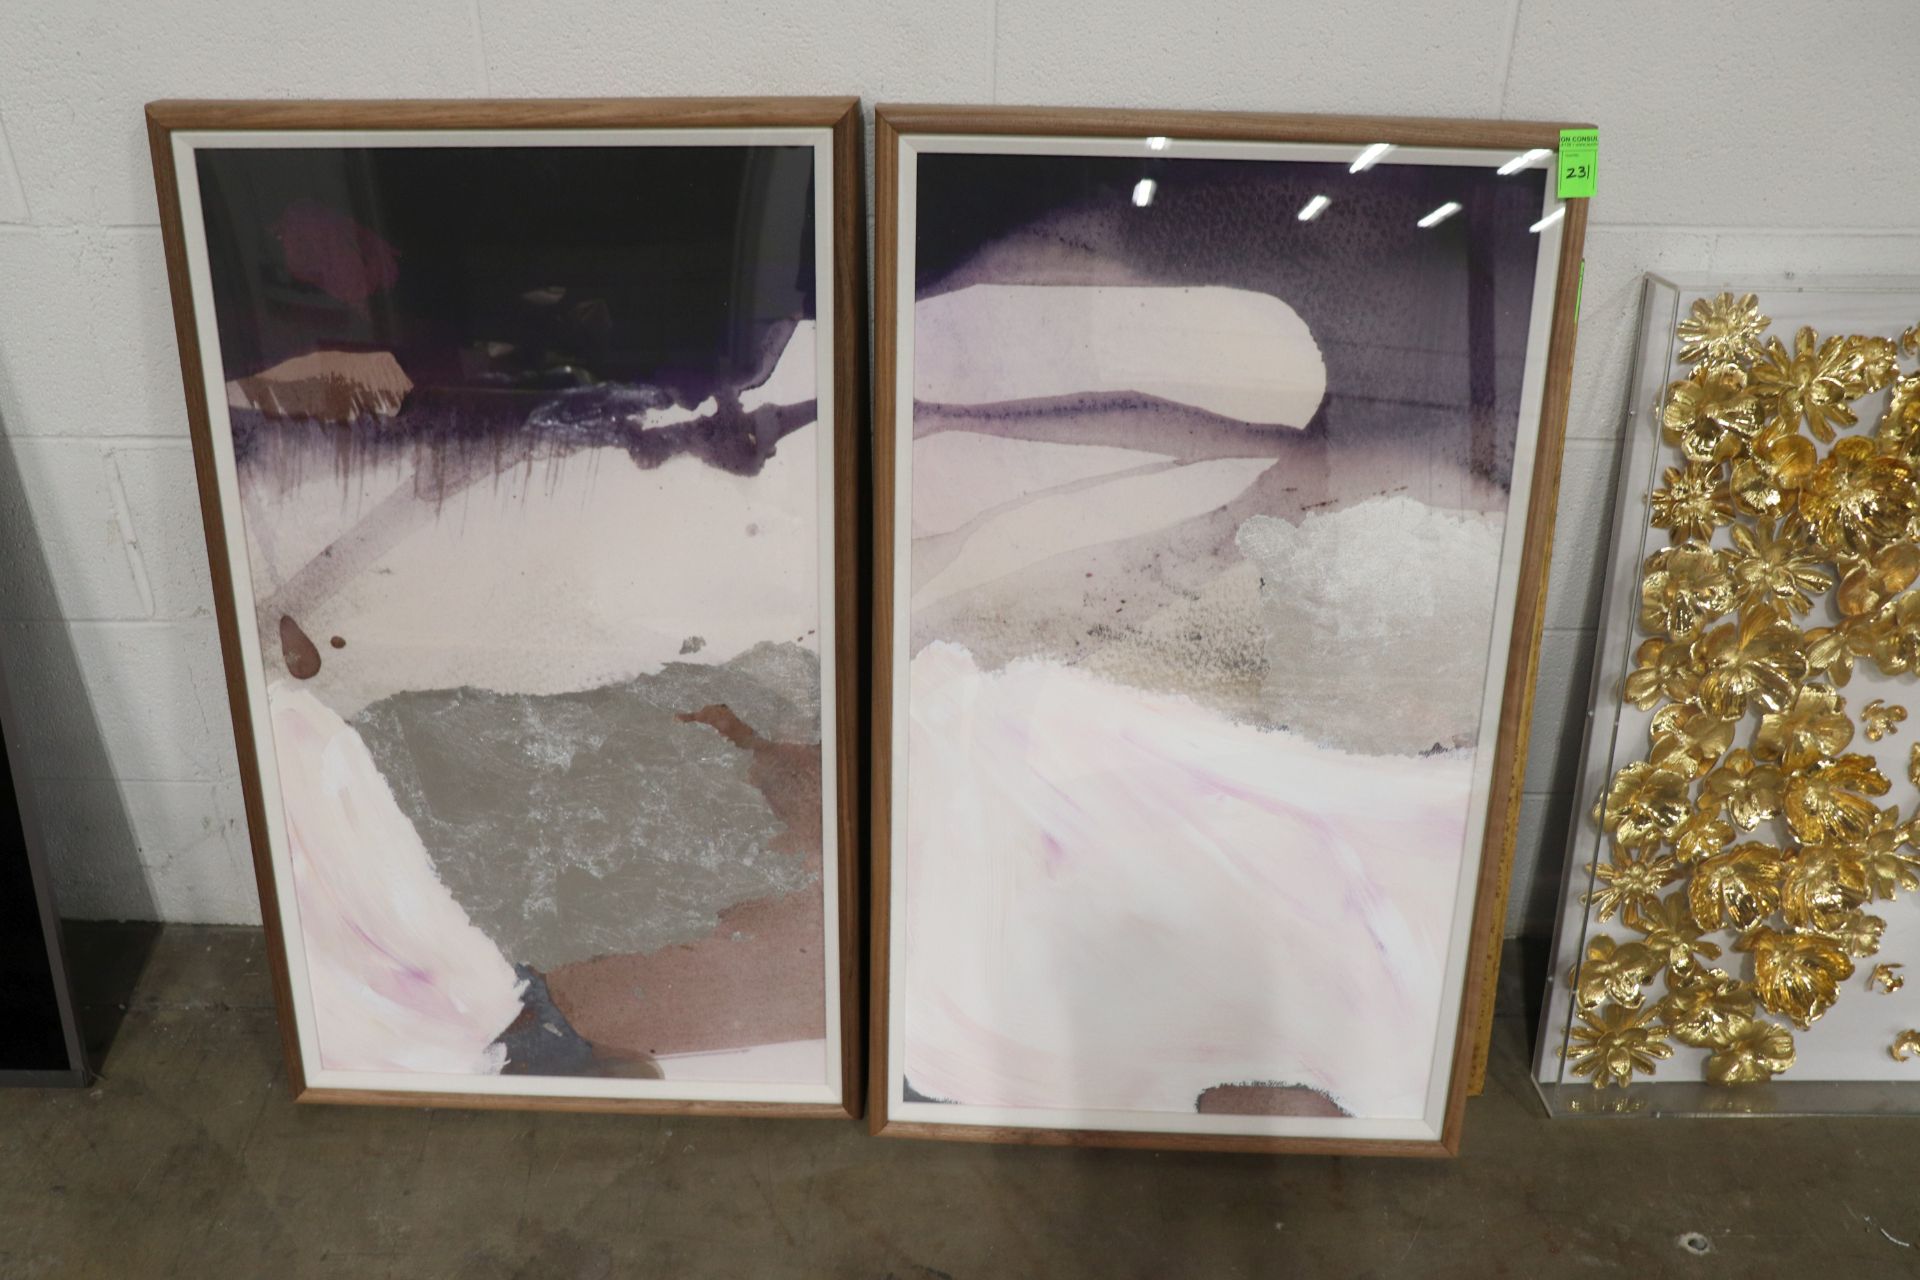 Pair of framed art, mixed media, unknown artist, "Quartz White", numbered 6/100, 37" x 22"